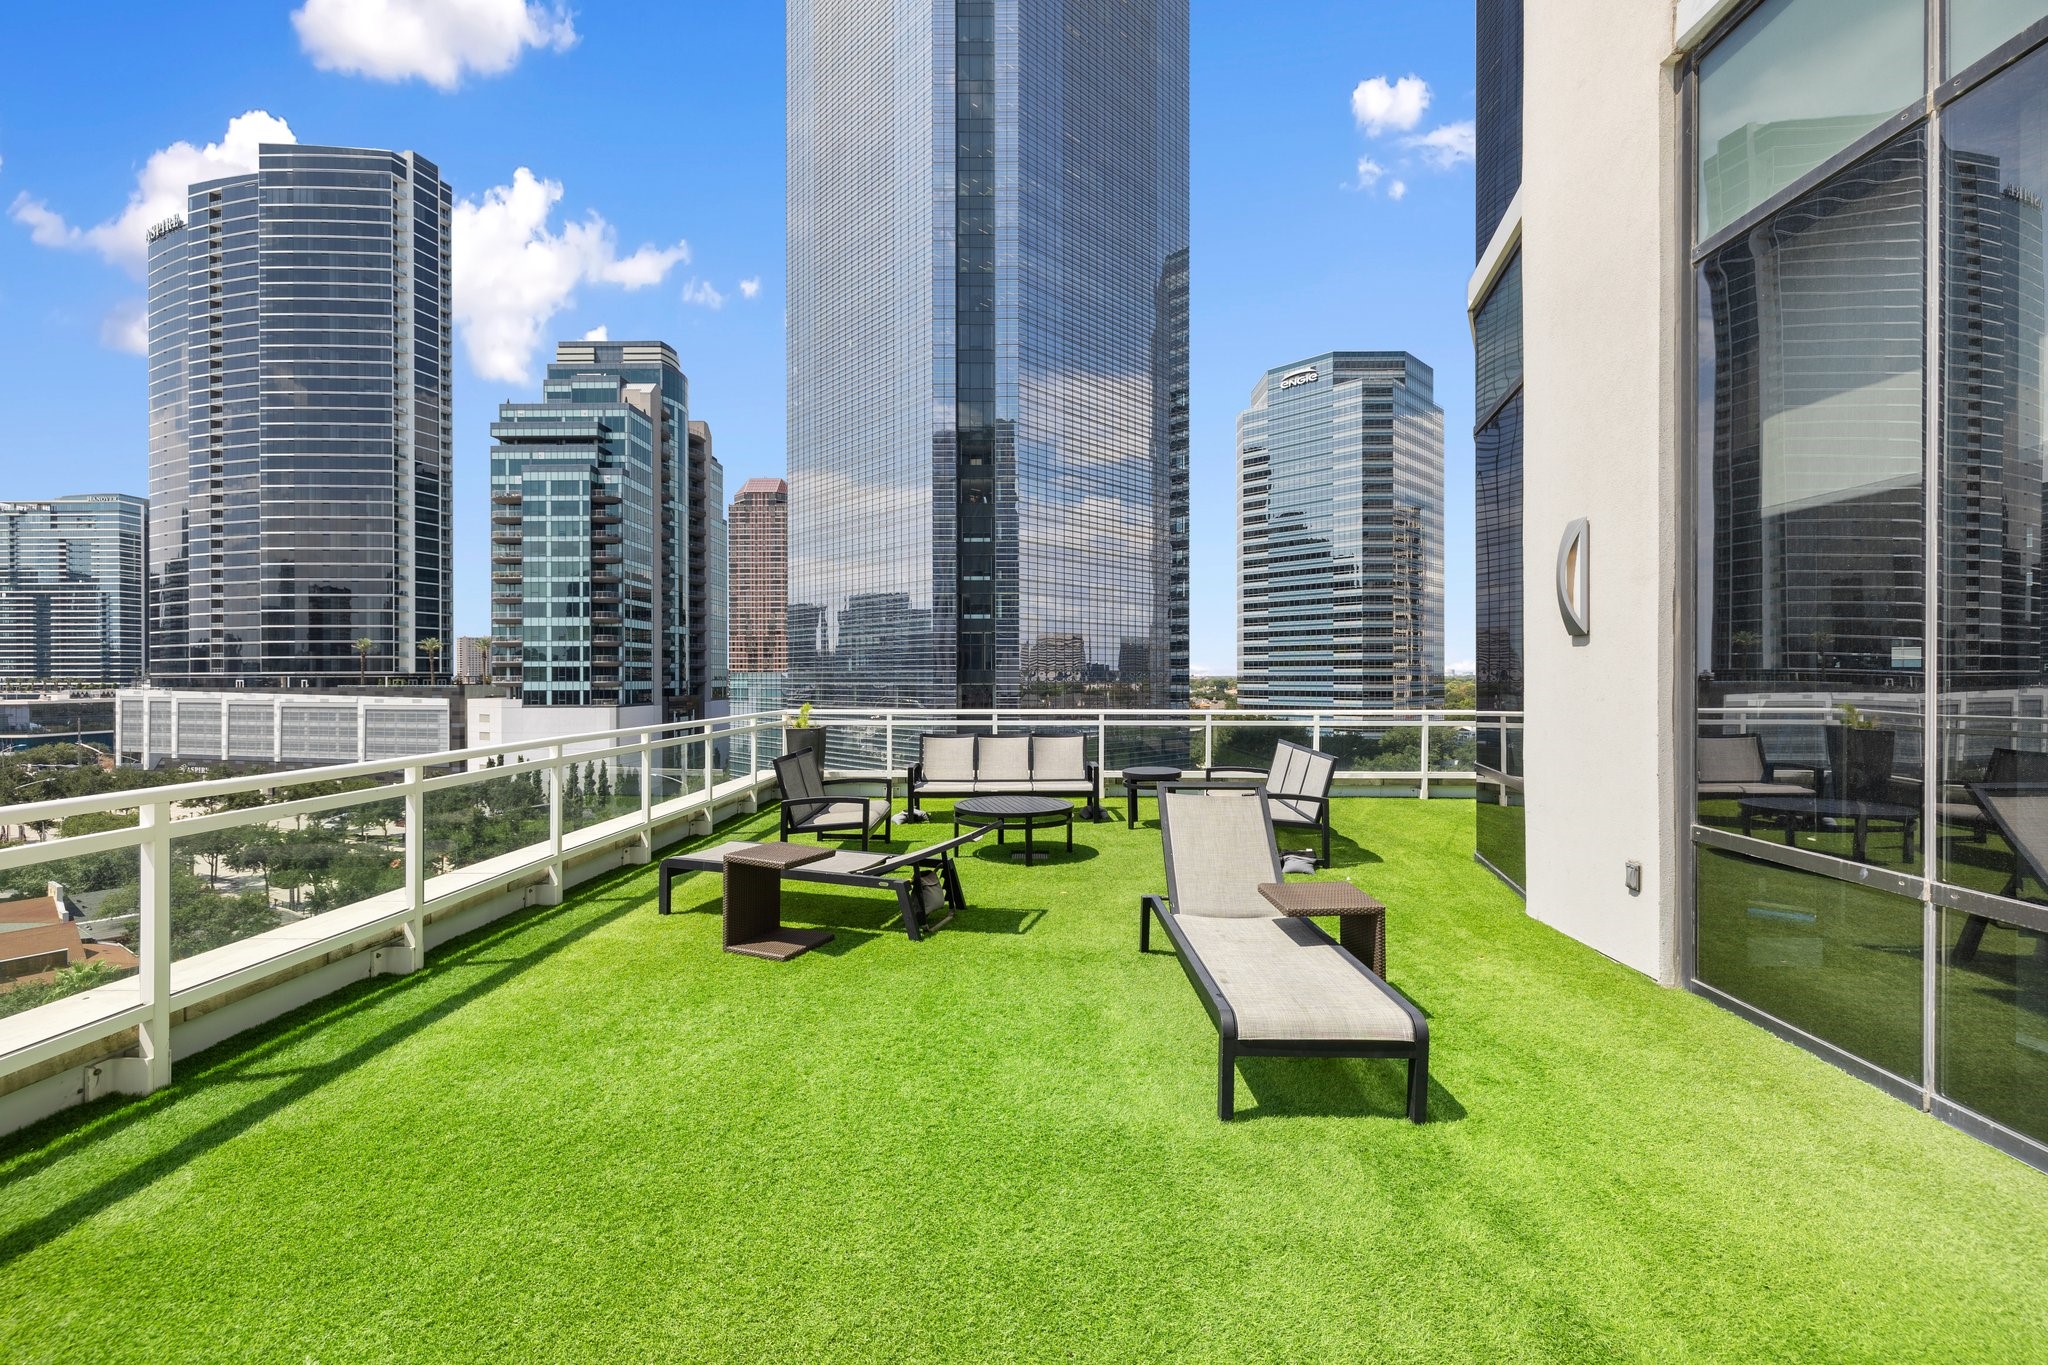 This rooftop deck, surrounded by skyscrapers, offers a serene urban escape. The vibrant green turf contrasts with the city backdrop, providing a perfect spot for sunbathing or gatherings. Modern lounge chairs and an unobstructed view make it a versatile haven amidst the city's hustle.